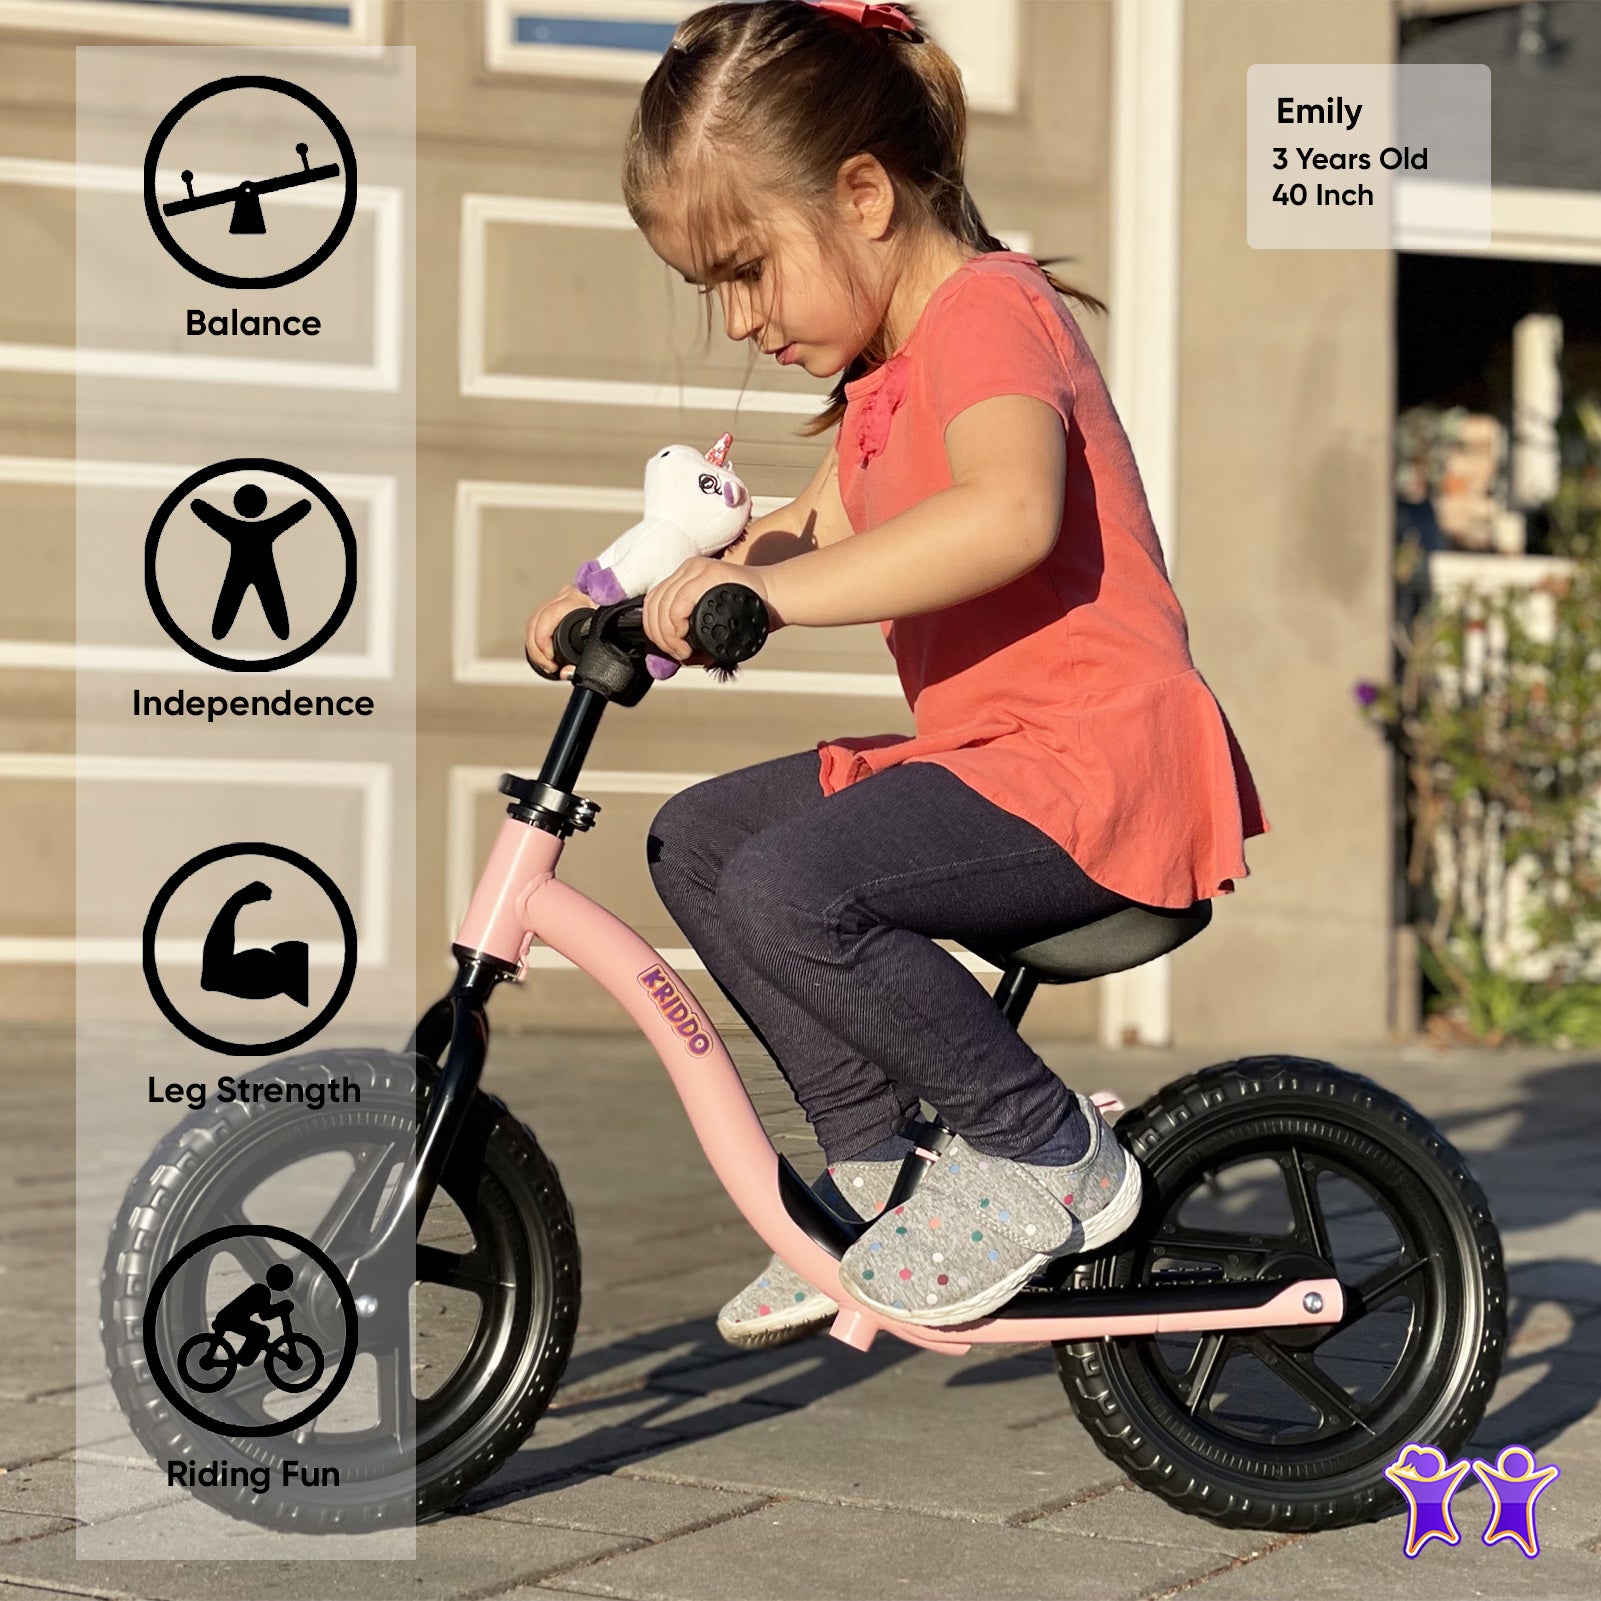 KRIDDO Toddler Balance Bike 2 Year Old, Age 18 Months to 5 Years Old, Early Learning Interactive Push Bicycle with Steady Balancing and Footrest, Gift for 2-5 Boys Girls, Pink